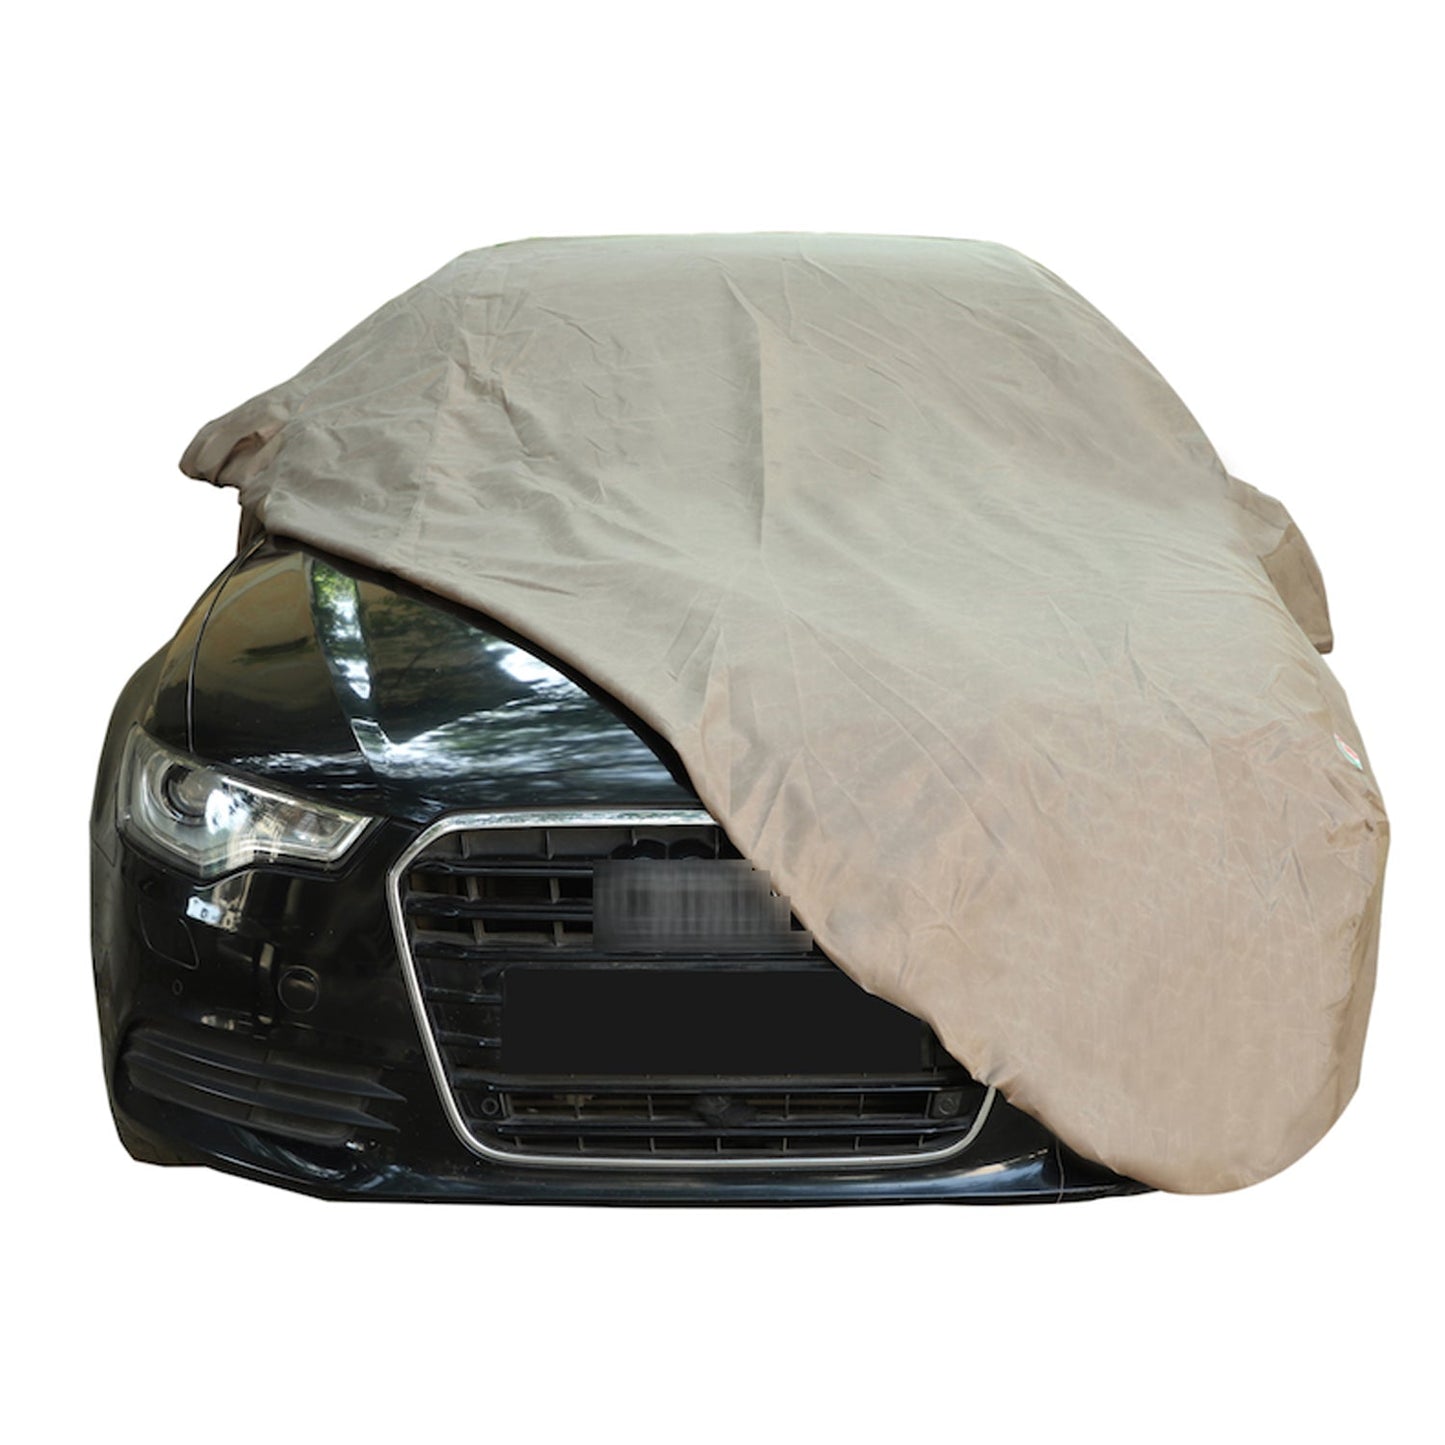 Oshotto Brown 100% Waterproof Car Body Cover with Mirror Pockets For Nissan Micra